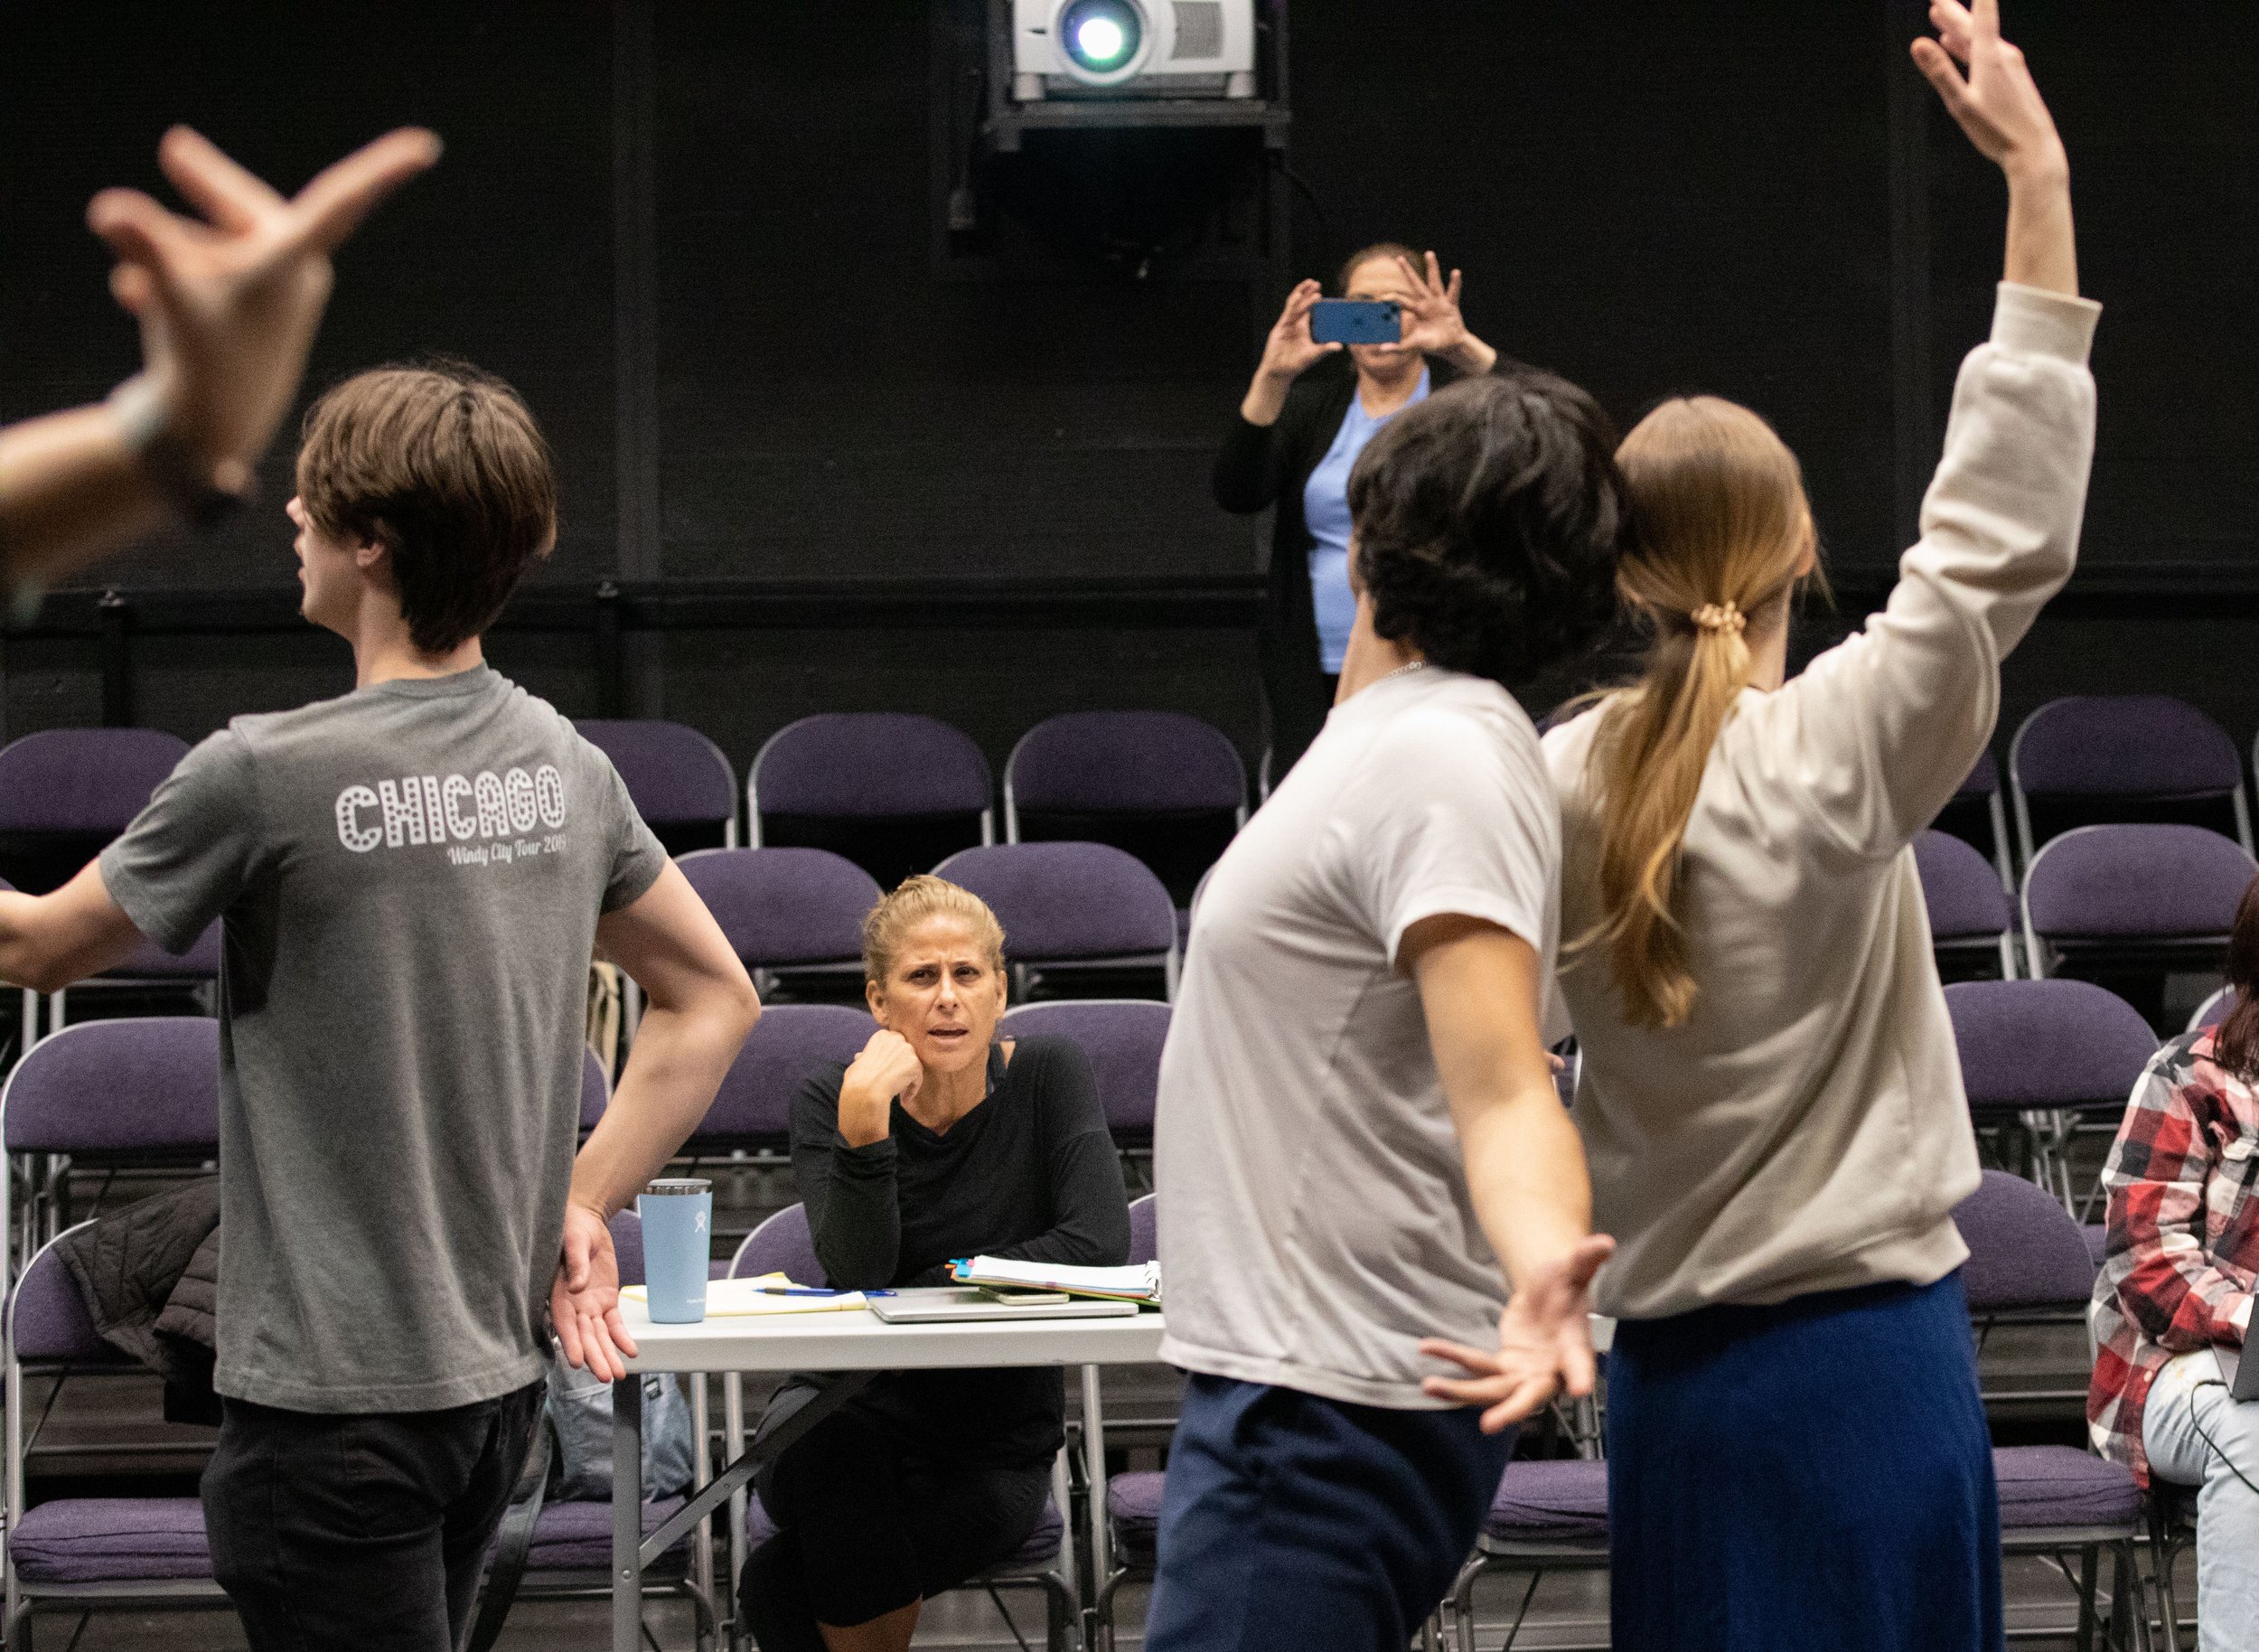  SMC Theater students Kathy Syta and Steve Whittle stand back to back at the end of their routine. In front, choreographer Cihtli Ocampo and Instructor Perviz Sawoski videoing with her phone from the top during class rehearsal for the musical “Hunchb